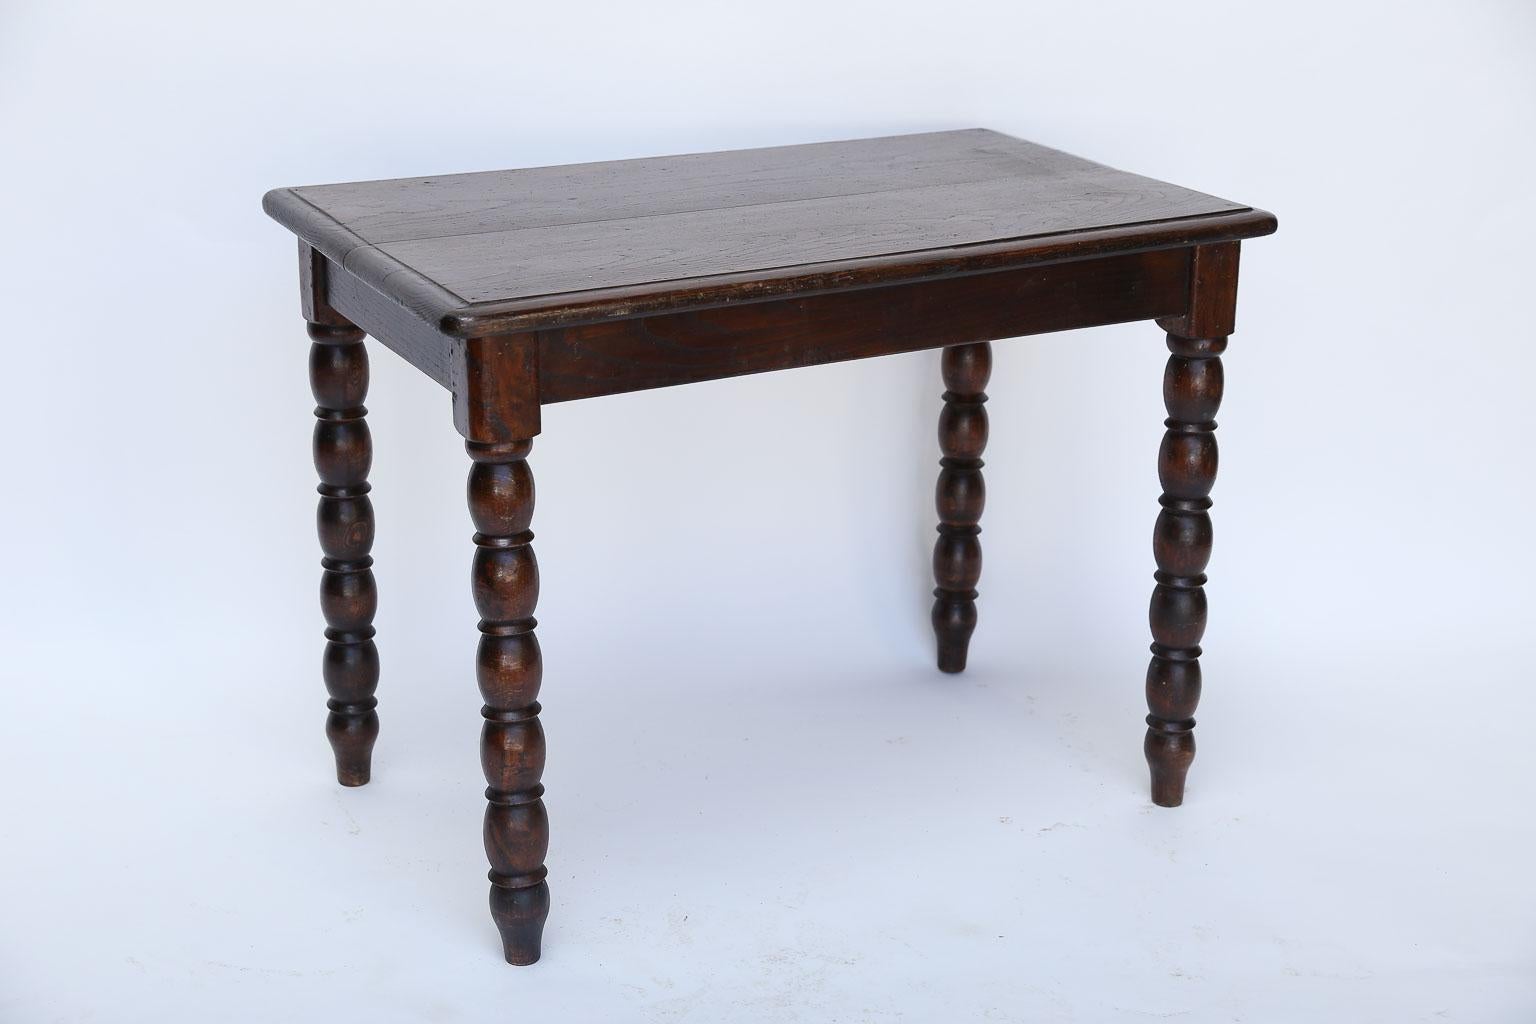 Lovely antique French side table with rectangular top supported on four bobbin turned legs. The table has a warm, dark finish and could be used as a side table or high tea table.